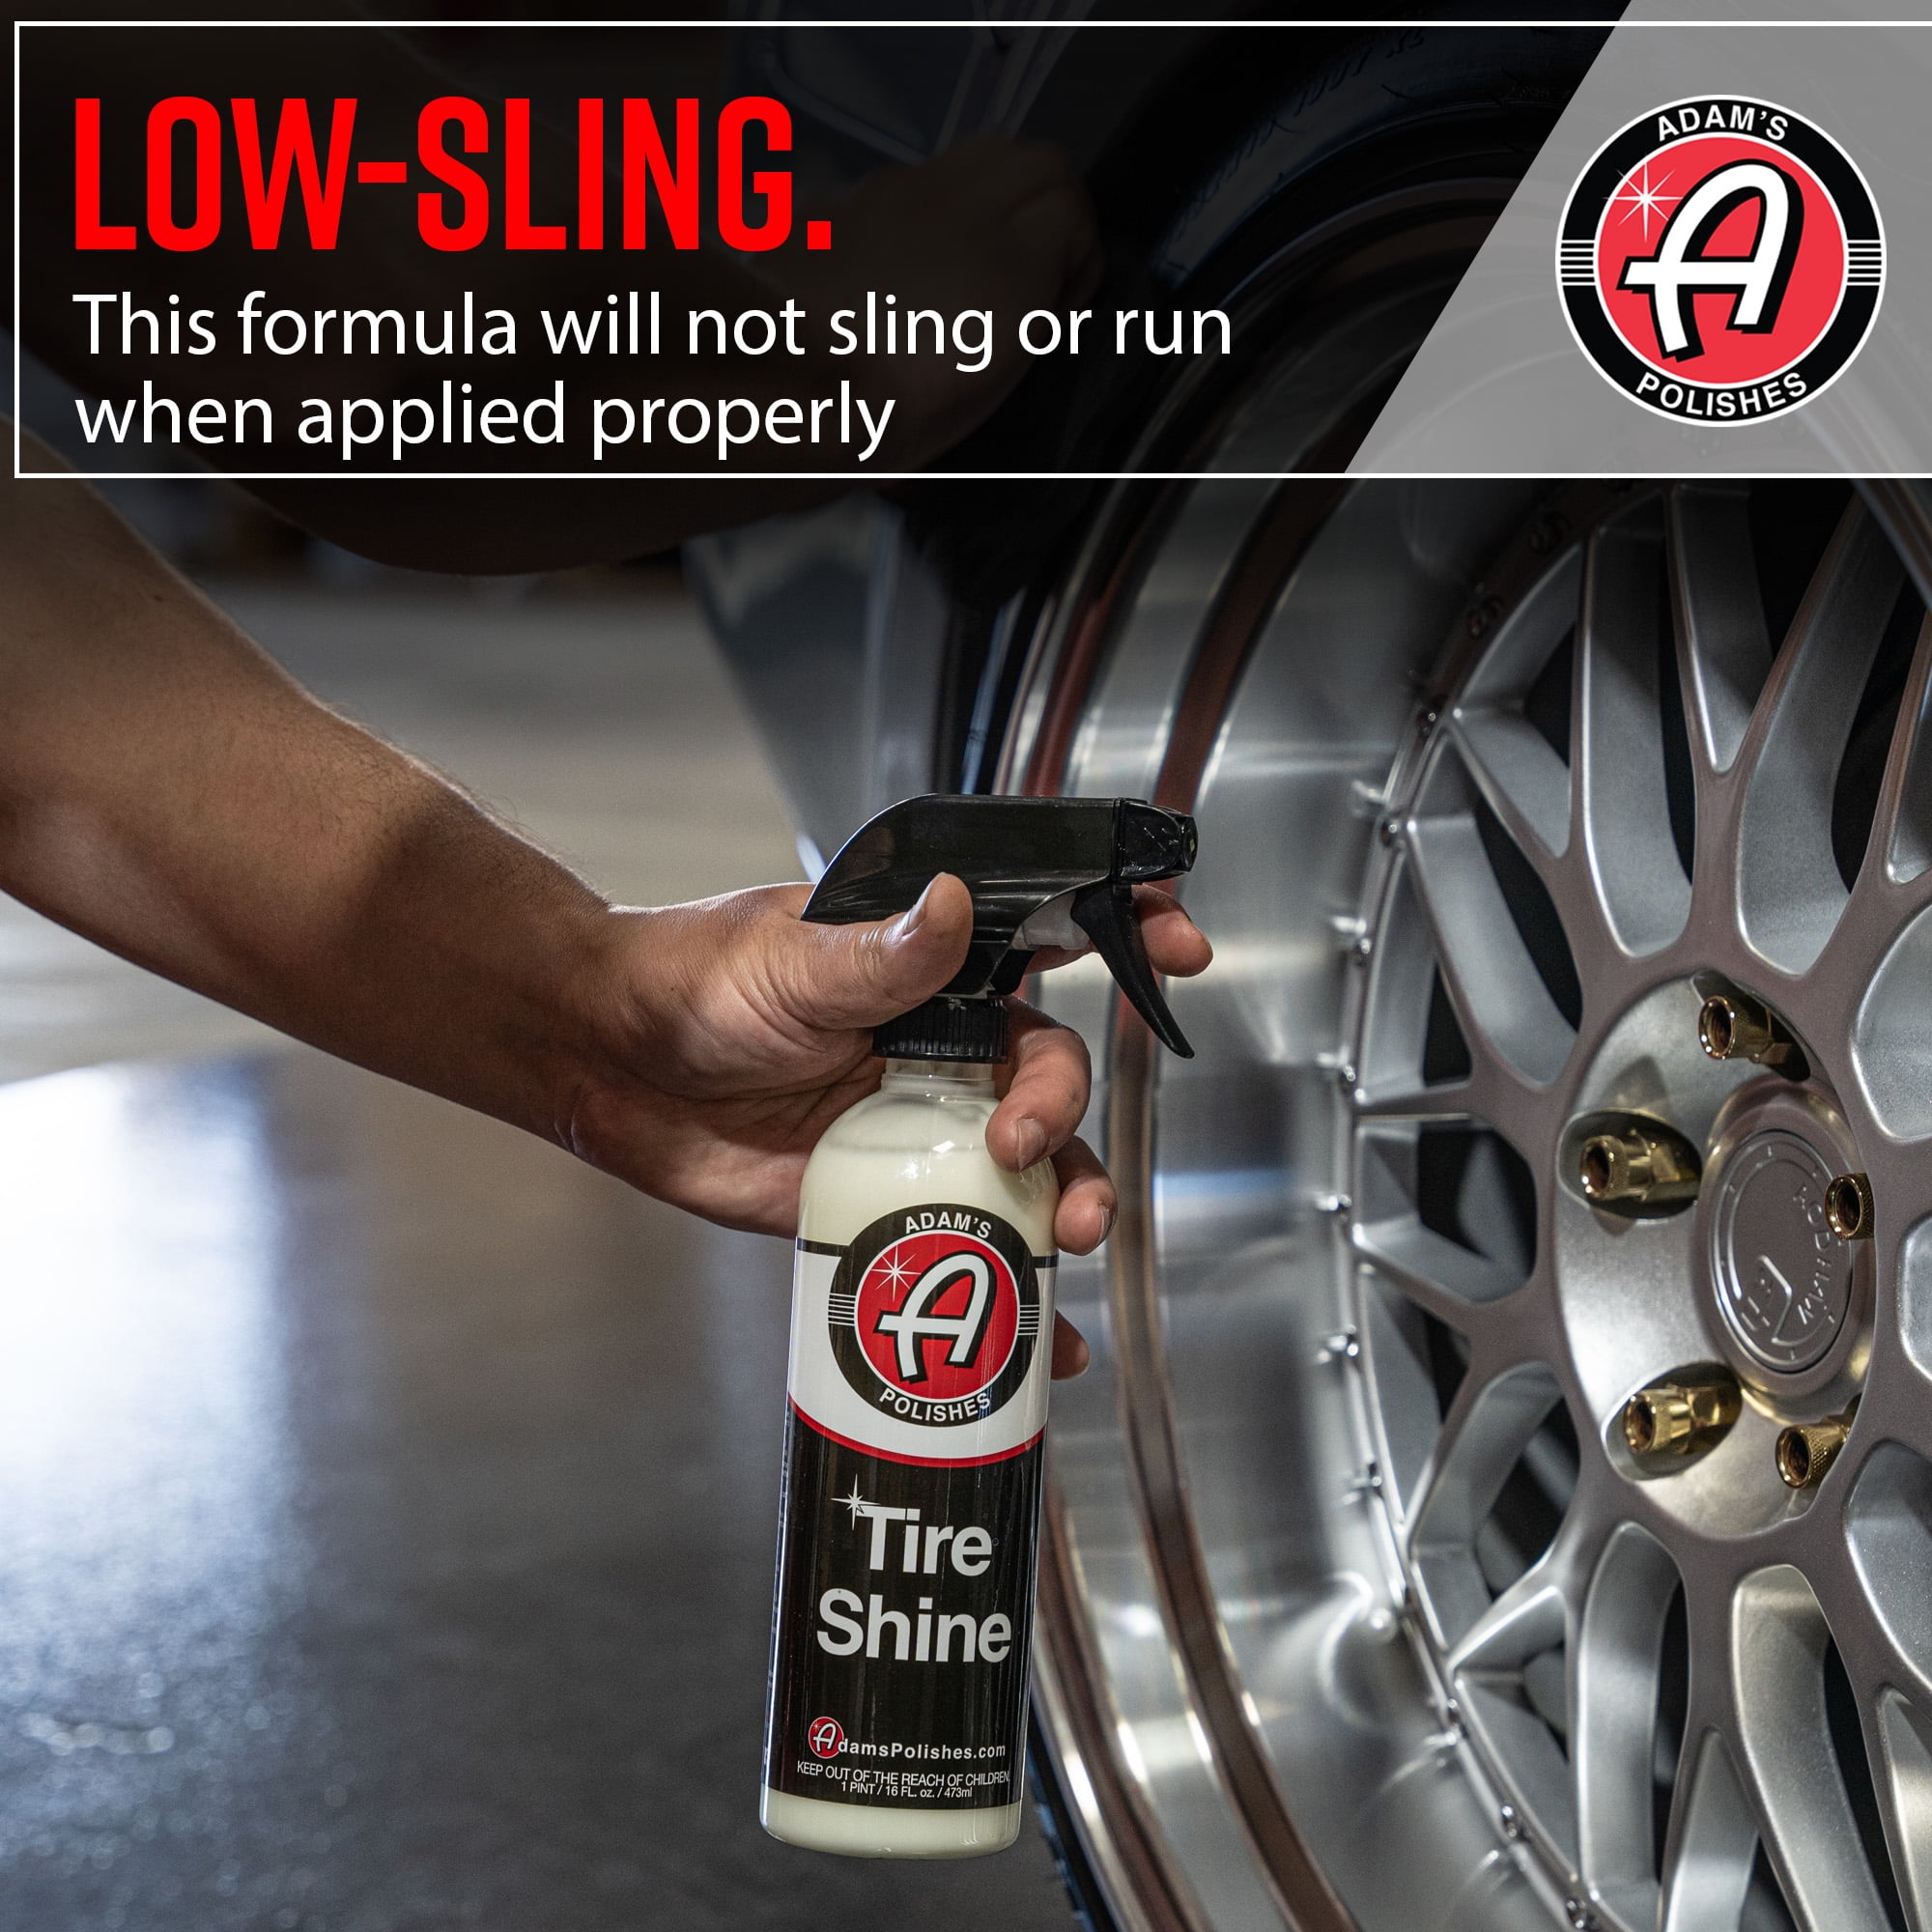  Adam's SiO2 Infused Tire Shine Plus 16oz - Achieve a Lustrous,  Dark, Long Lasting Shine - Non-Greasy and No Sling Formulation Infused with  SiO2 for Increased a Longer, Durable Shine (Refill